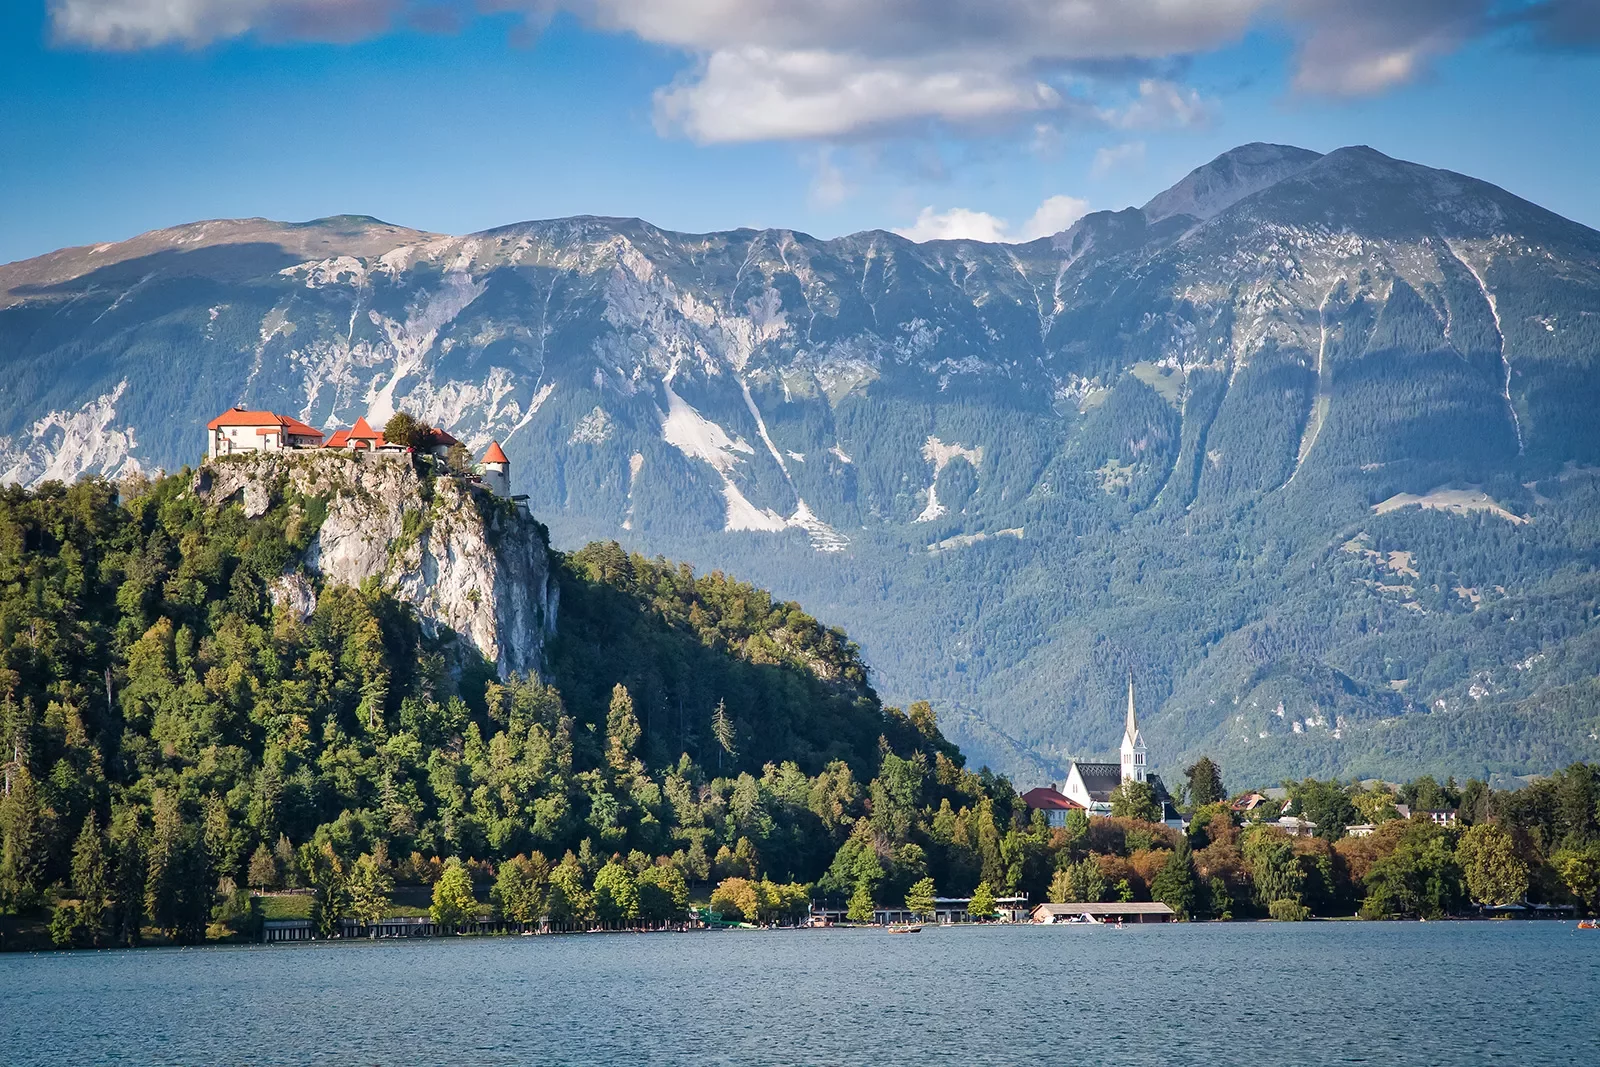 Wide shot of Bled Castle, town, lake below, mountain behind.